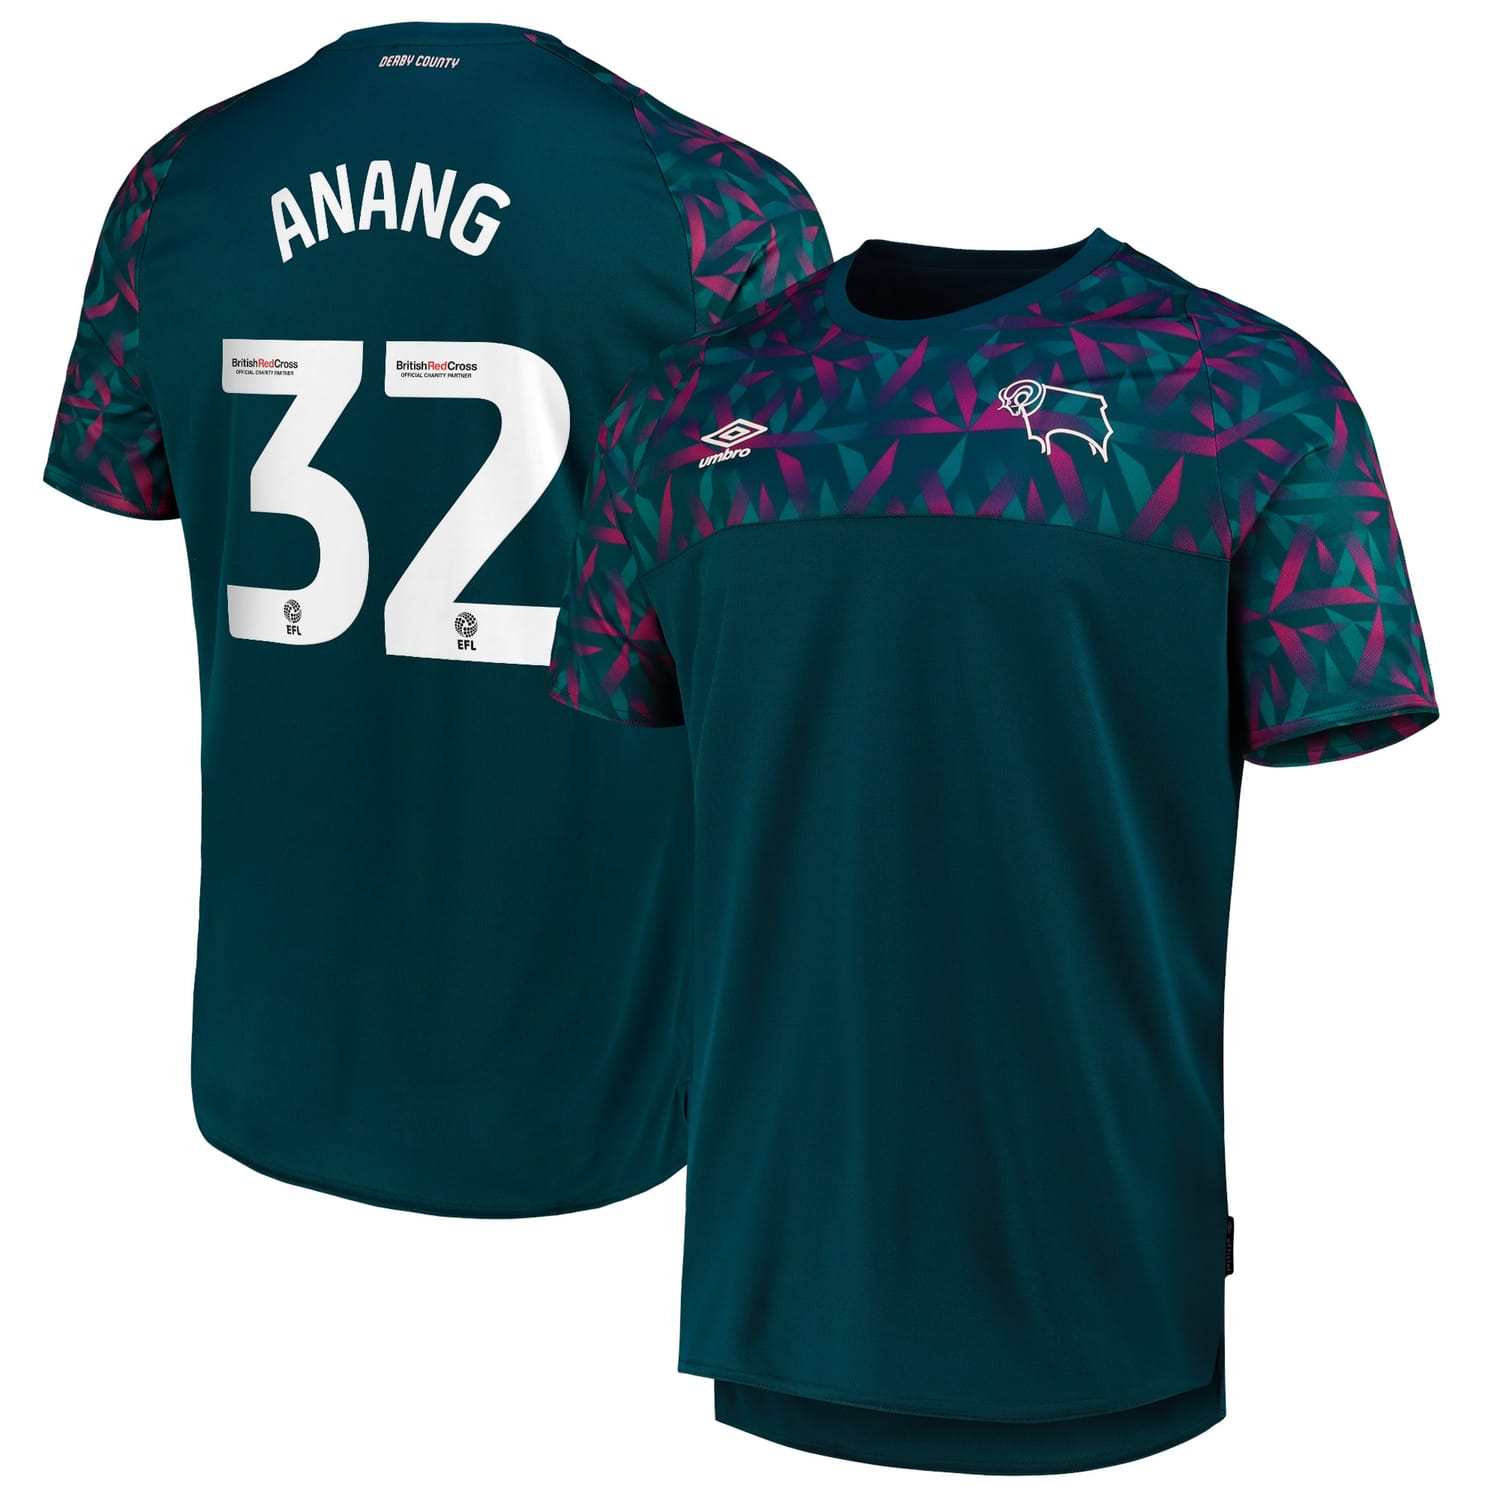 EFL League One Derby County Home Goalkeeper Jersey Shirt 2022-23 player Anang 32 printing for Men